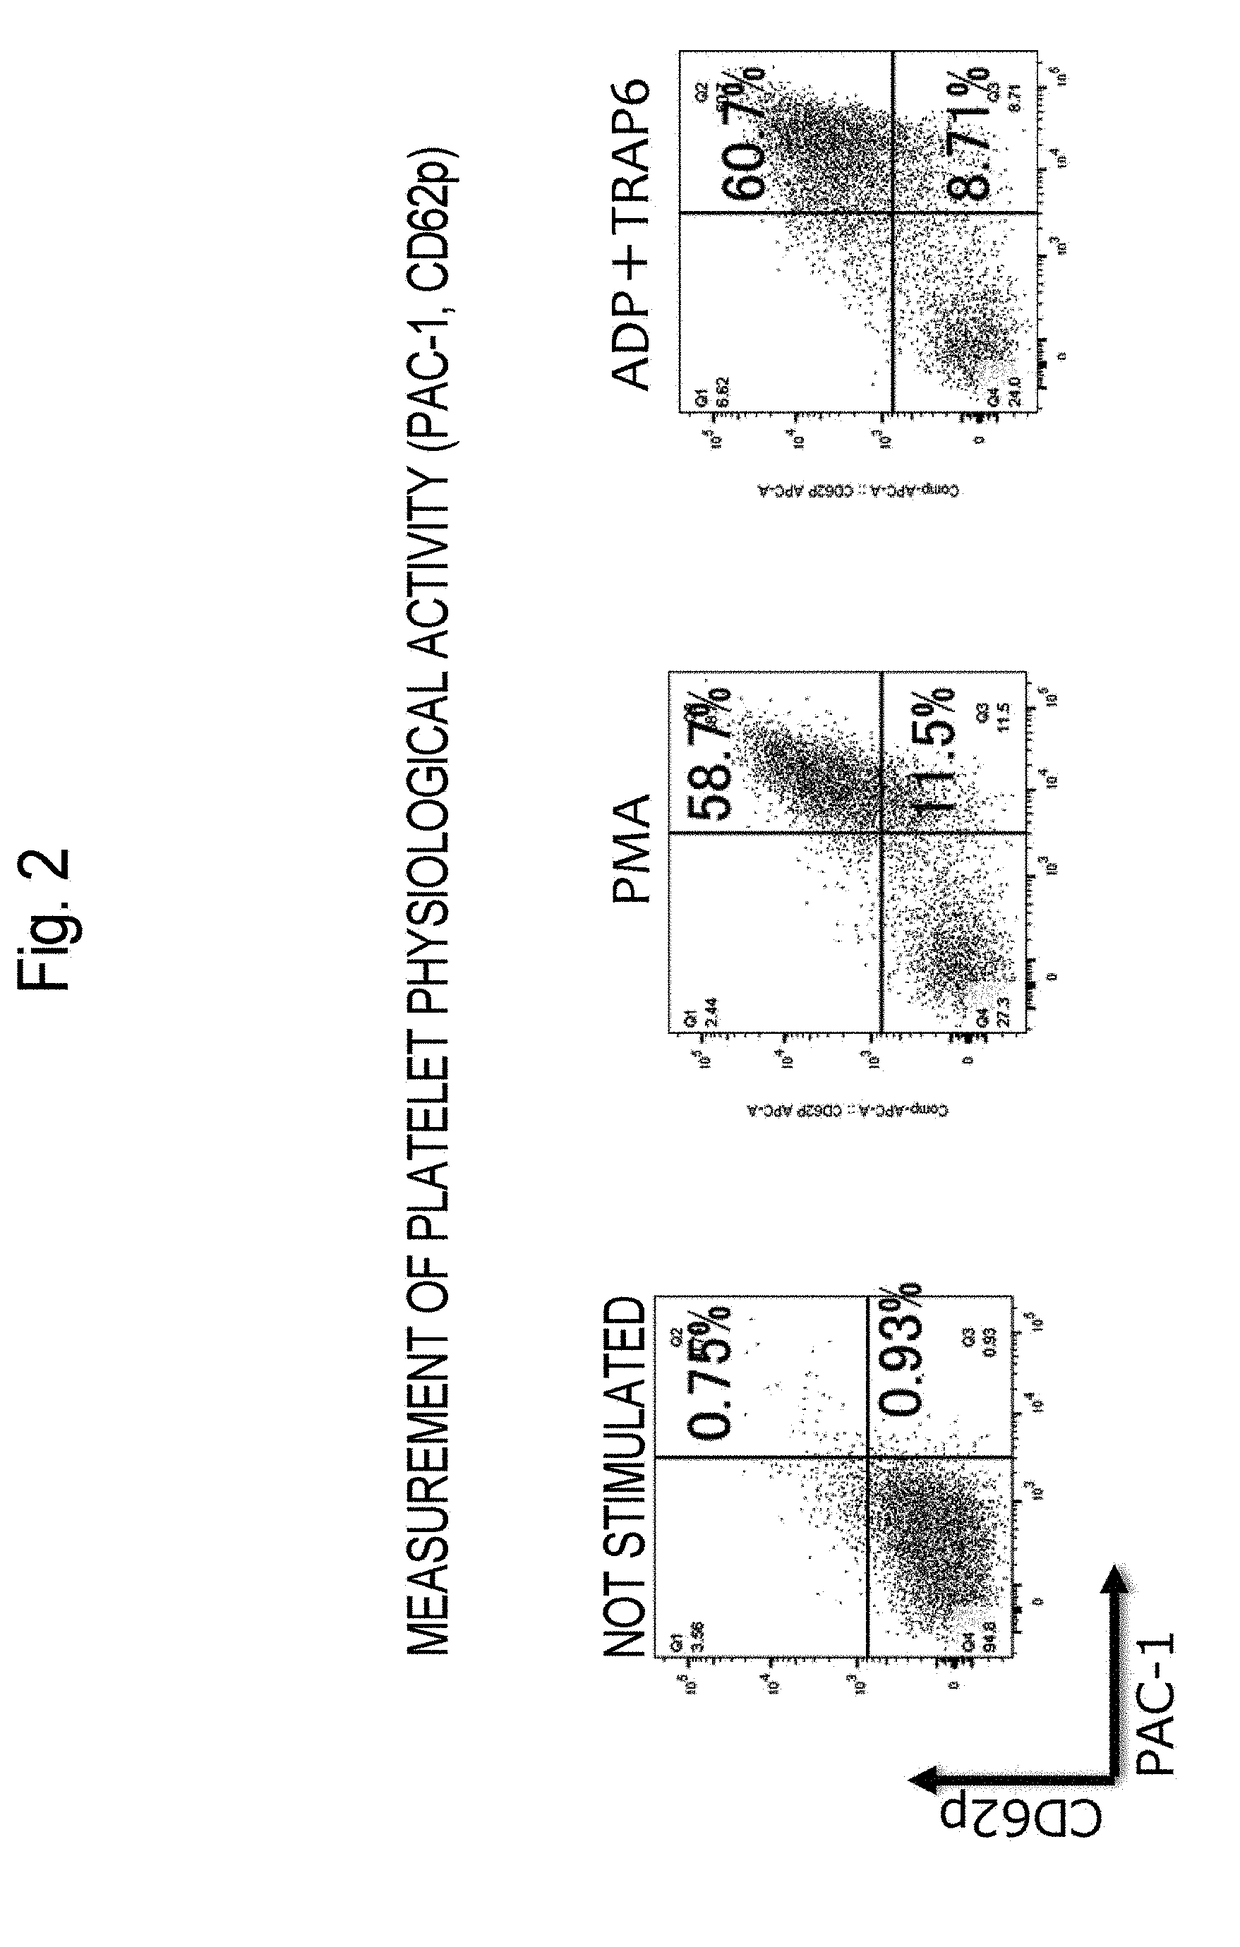 Method for Producing Purified Platelets